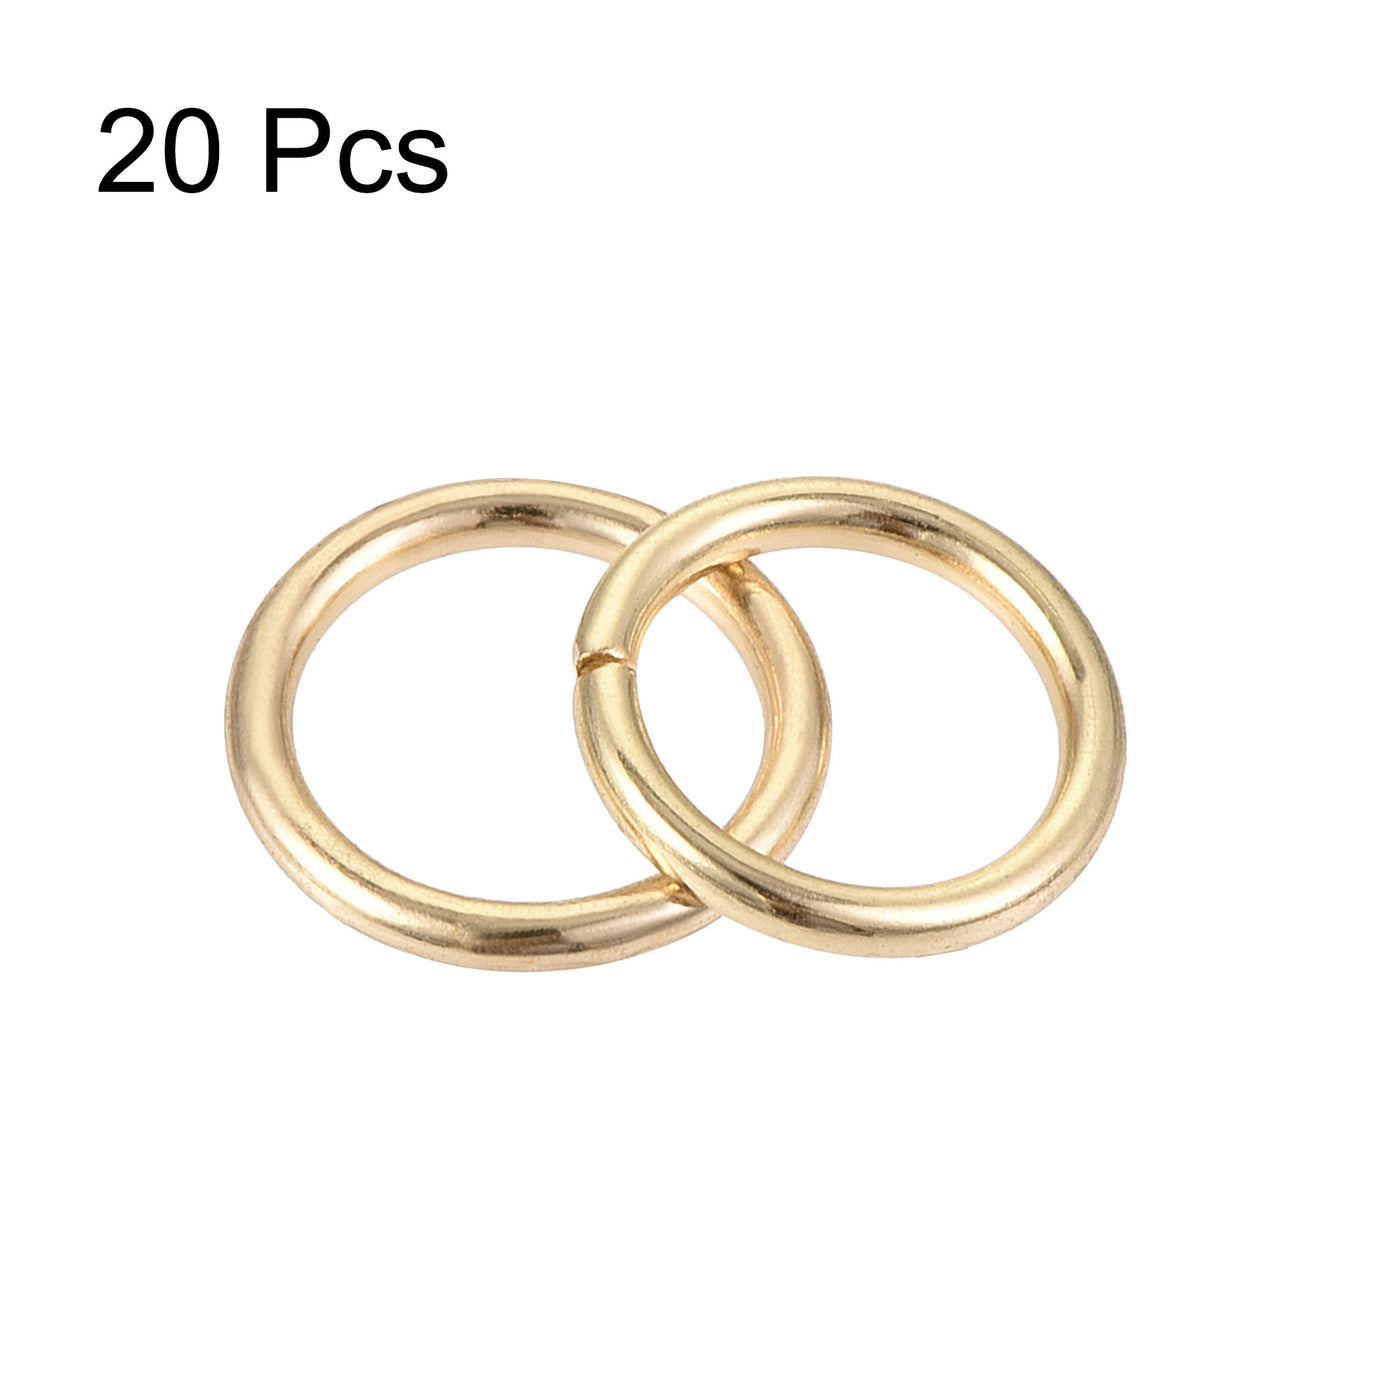 uxcell Uxcell 8mm Metal O Rings Non-Welded for Straps Bags Belts DIY Gold Tone 20pcs